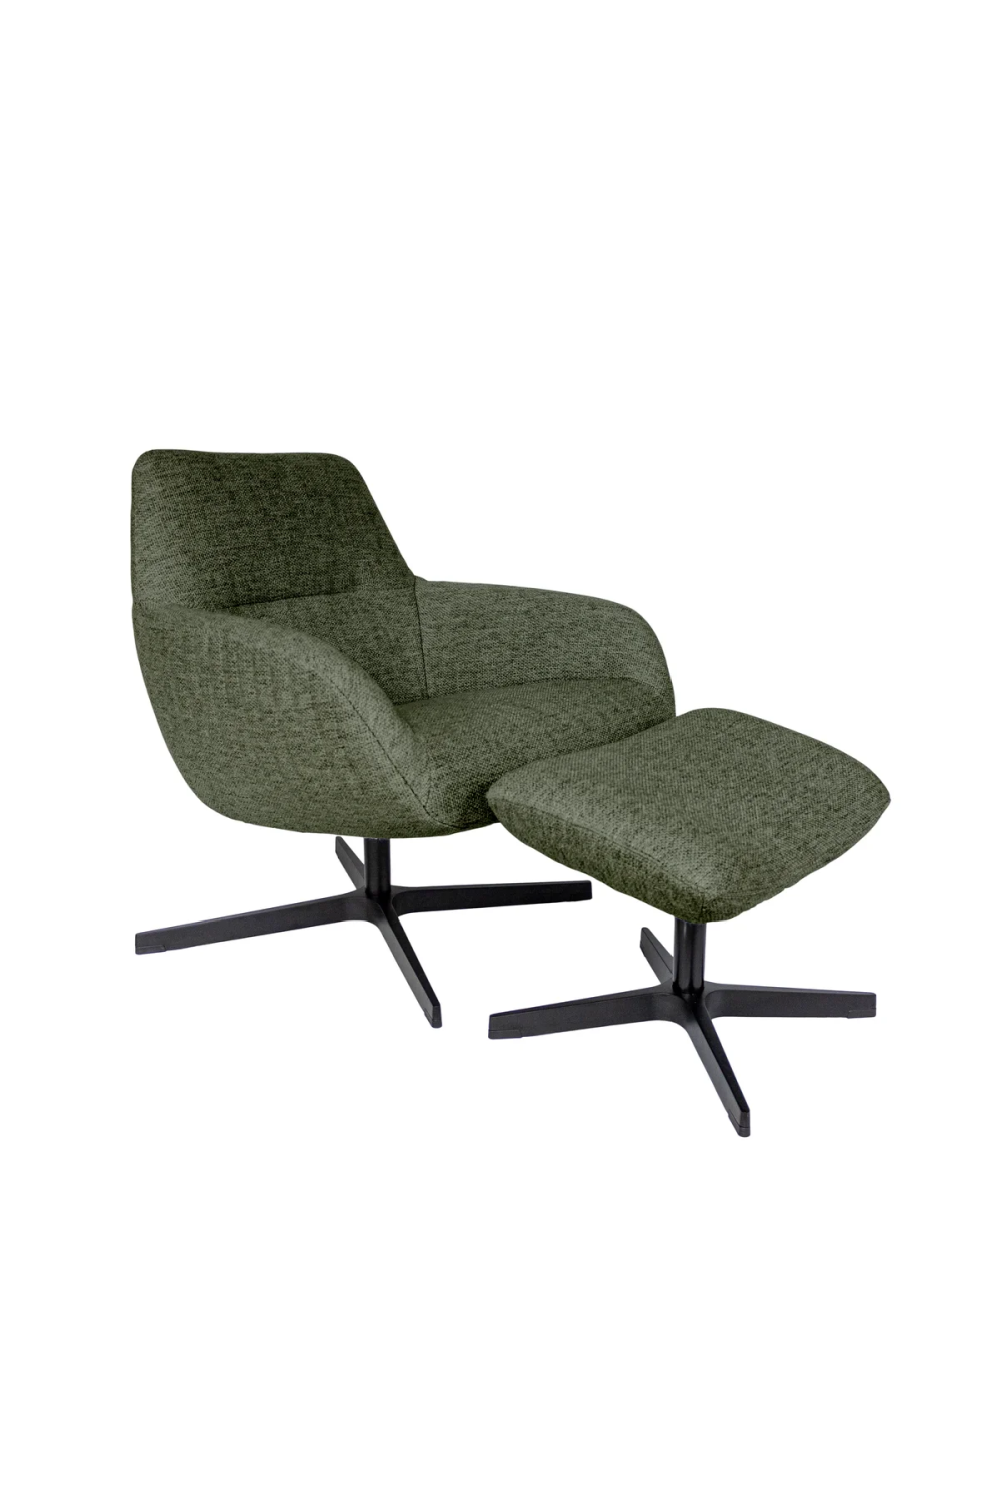 Modern Lounge Chair With Footrest Dome Deco Finley Giant fabric Green Dome Deco - OROA